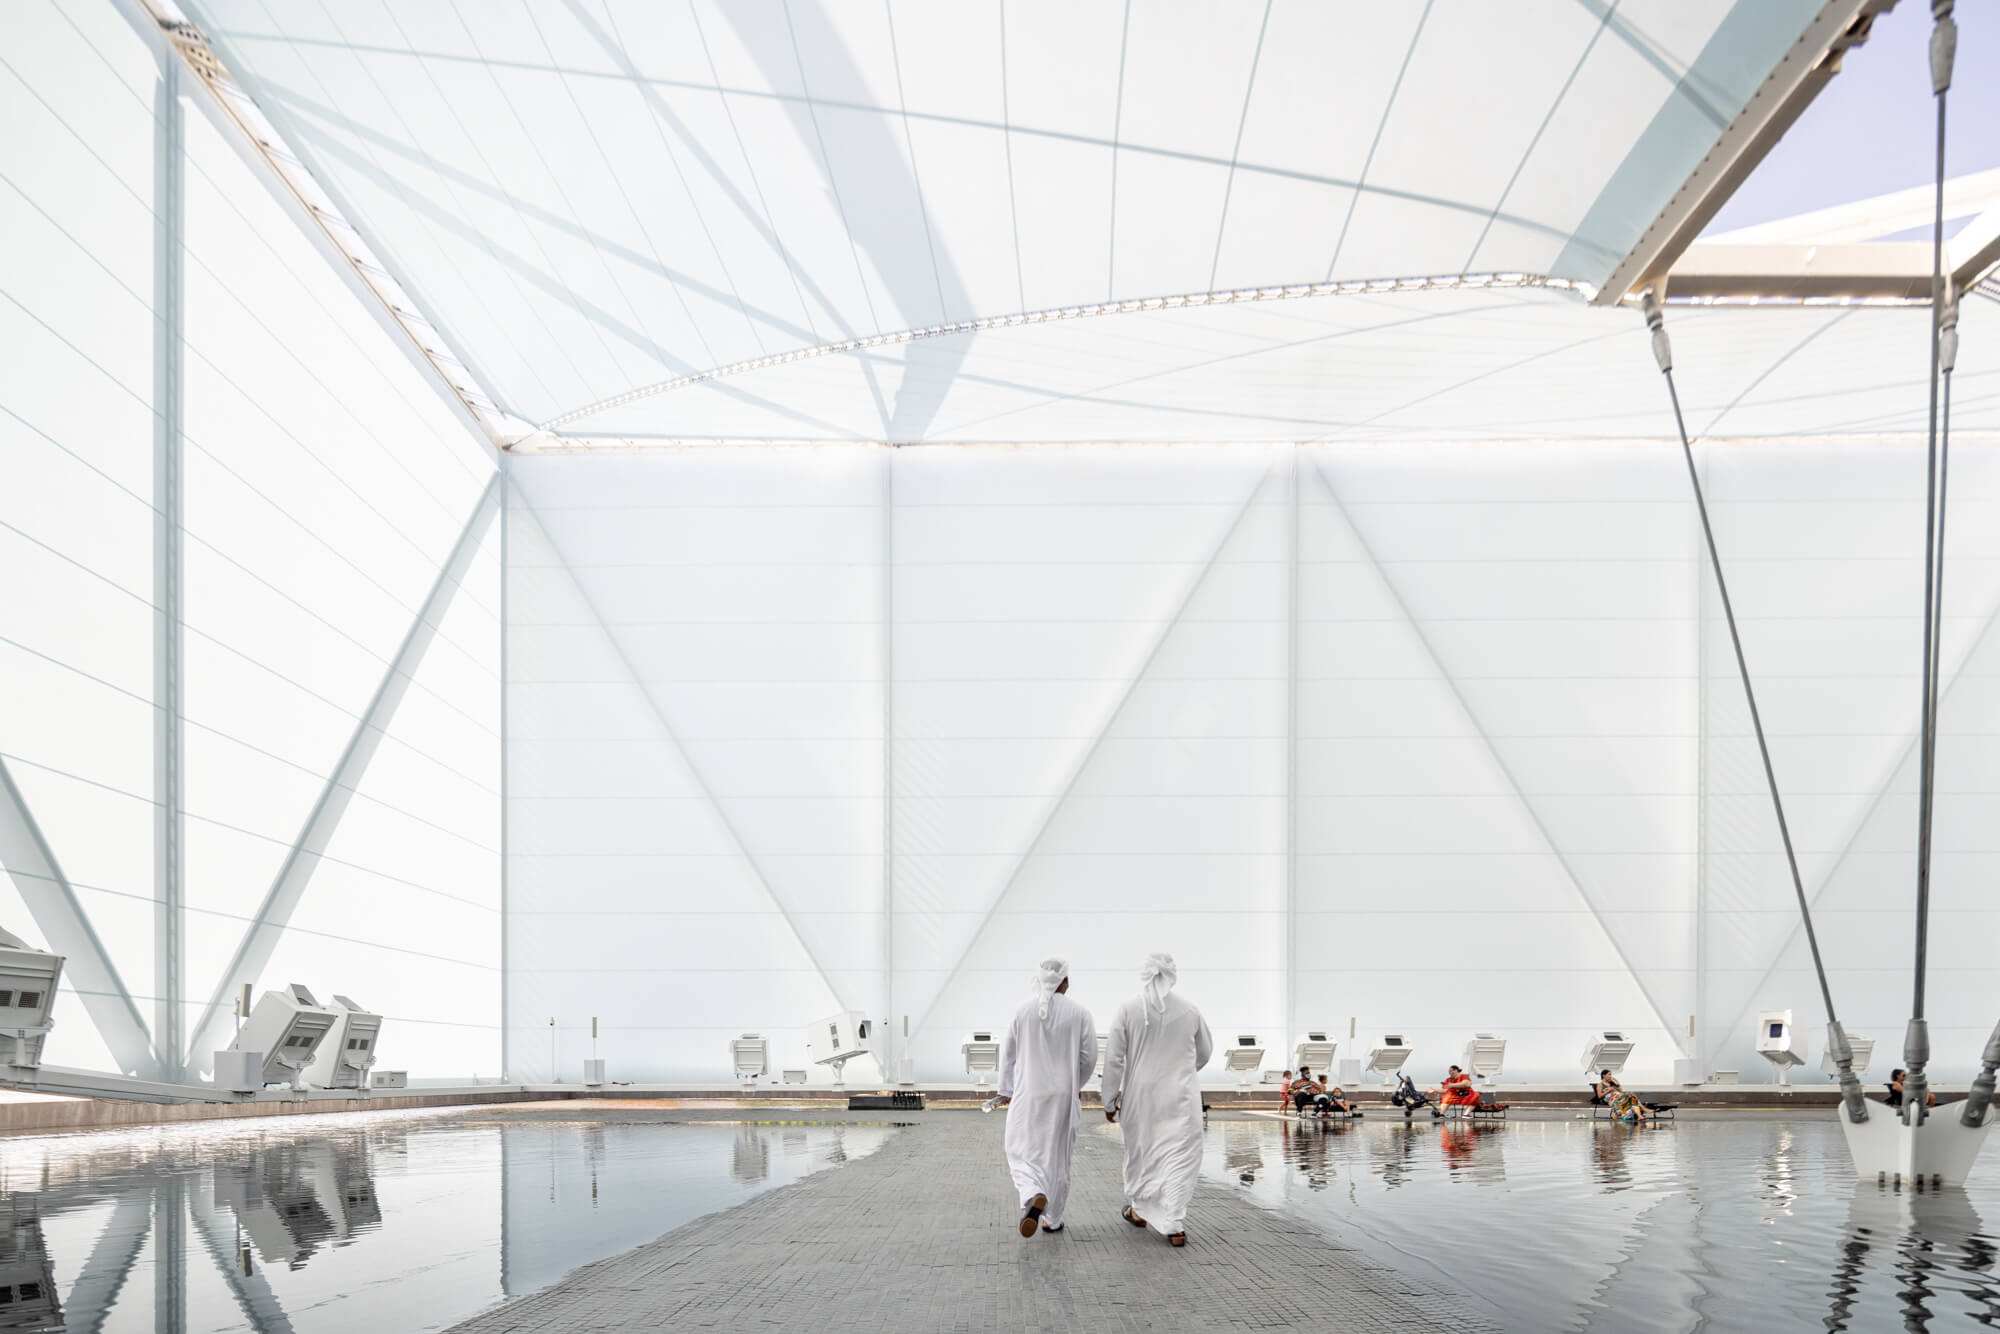 people walk across a shallow pool of water in a white fabric-sheathed structure